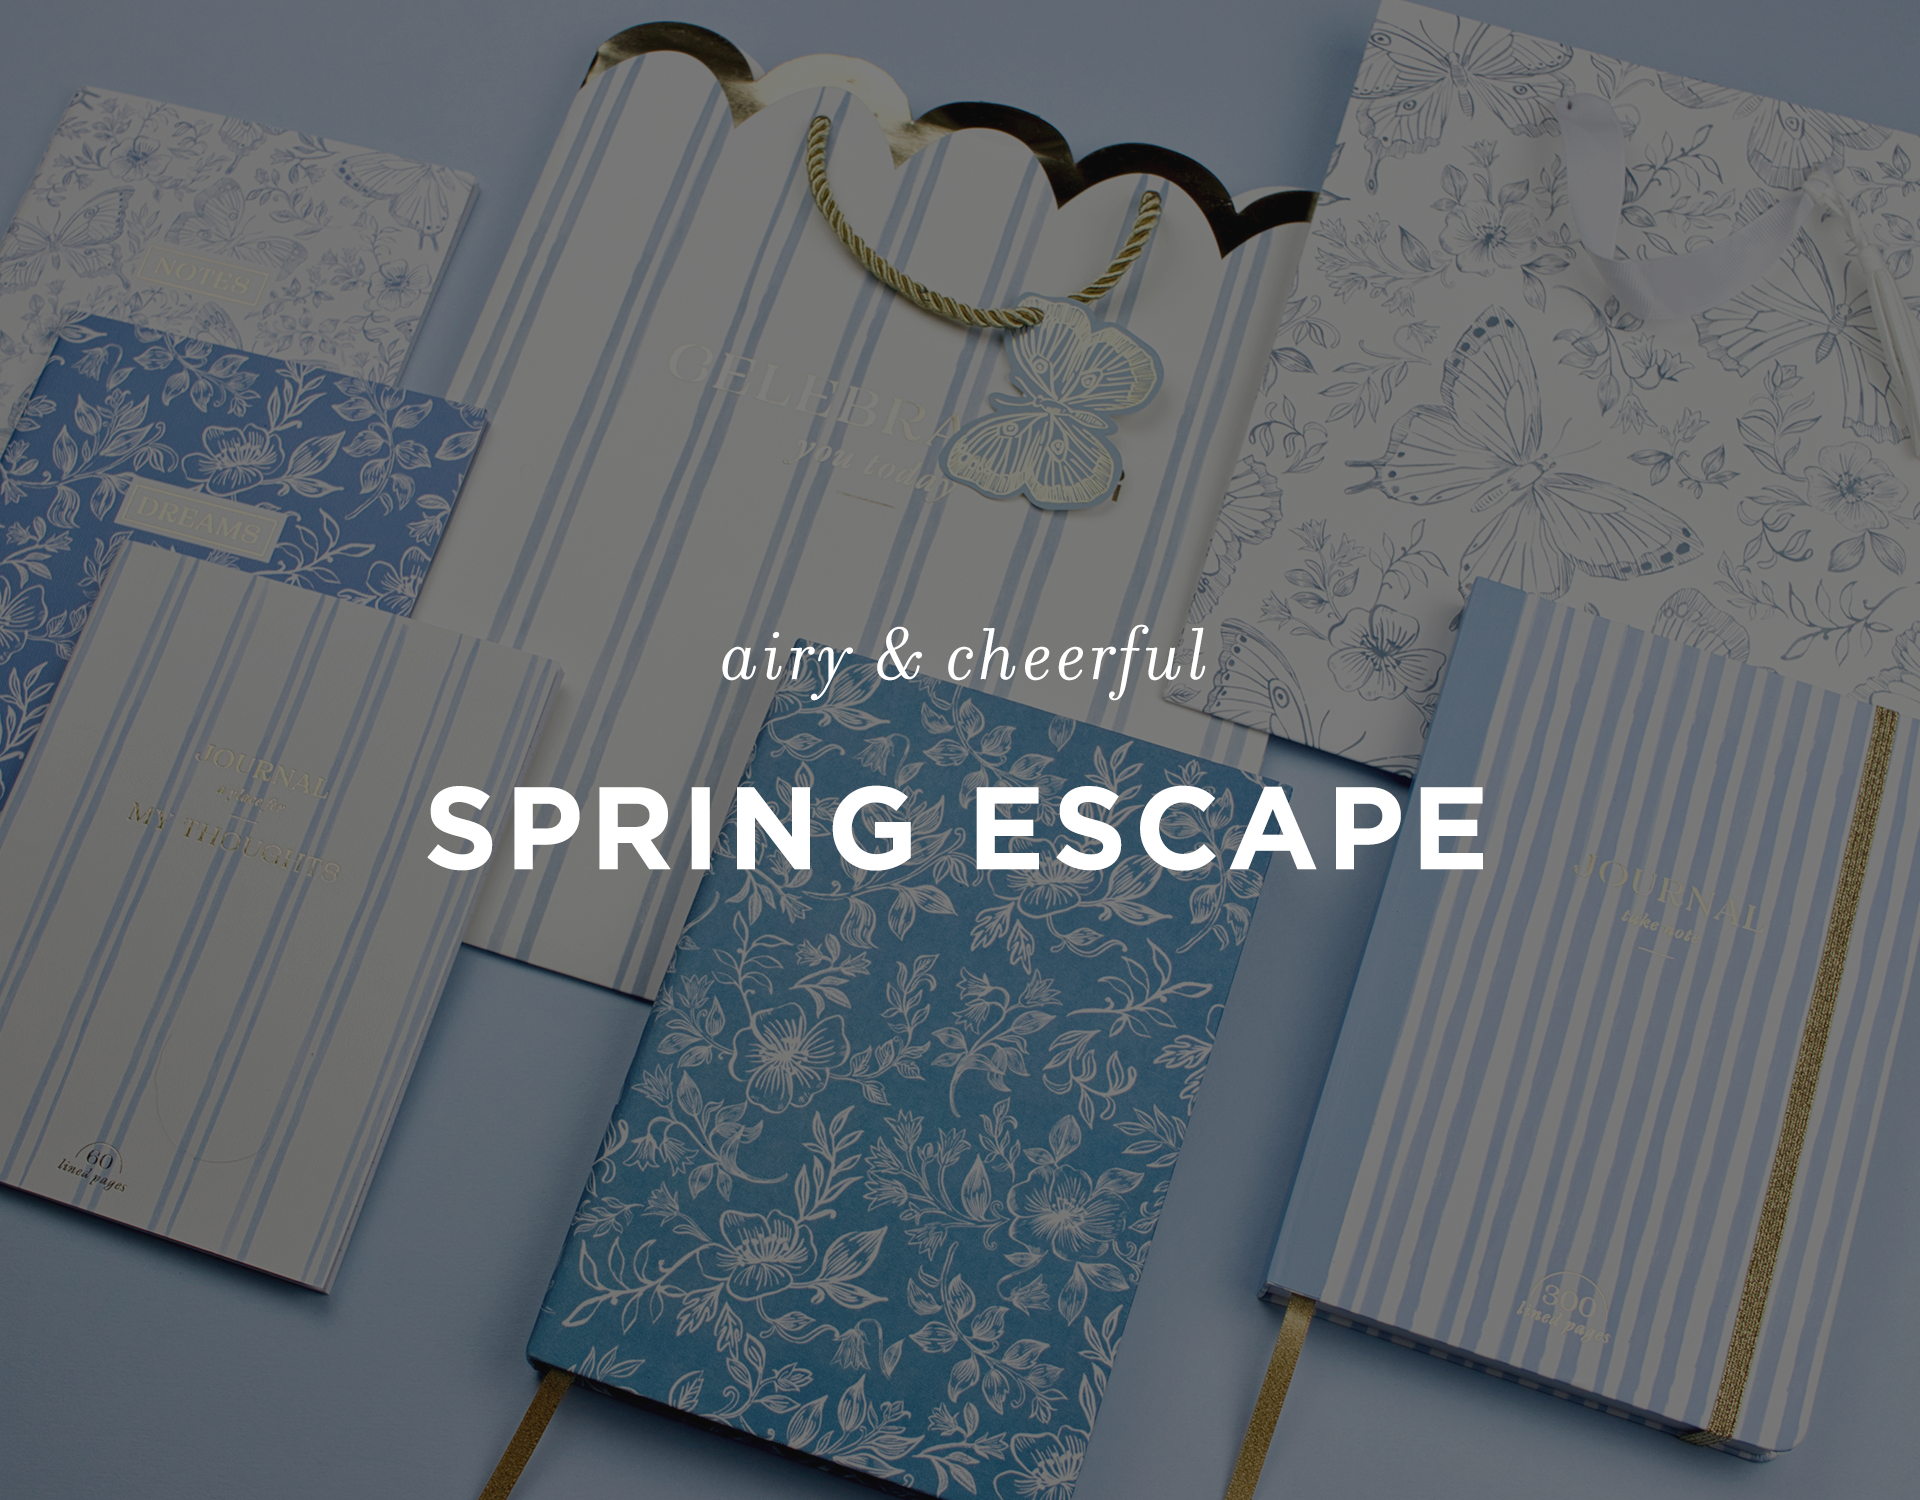 spring escape mobile banner image featuring elum deisgns spring escape collection of journals